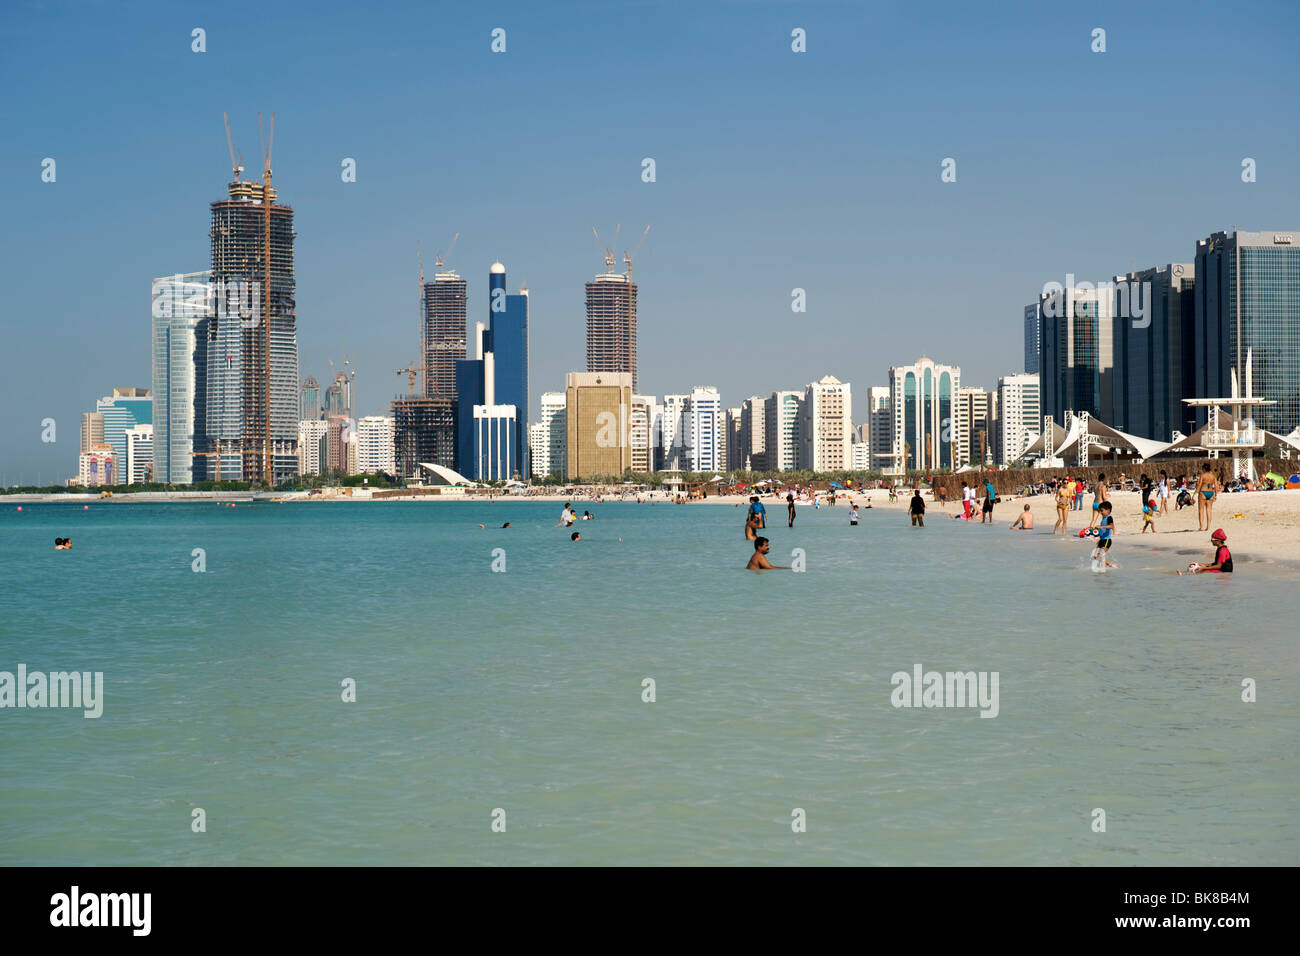 The beachfront and buildings in Abu Dhabi in the United Arab Emirates. Stock Photo